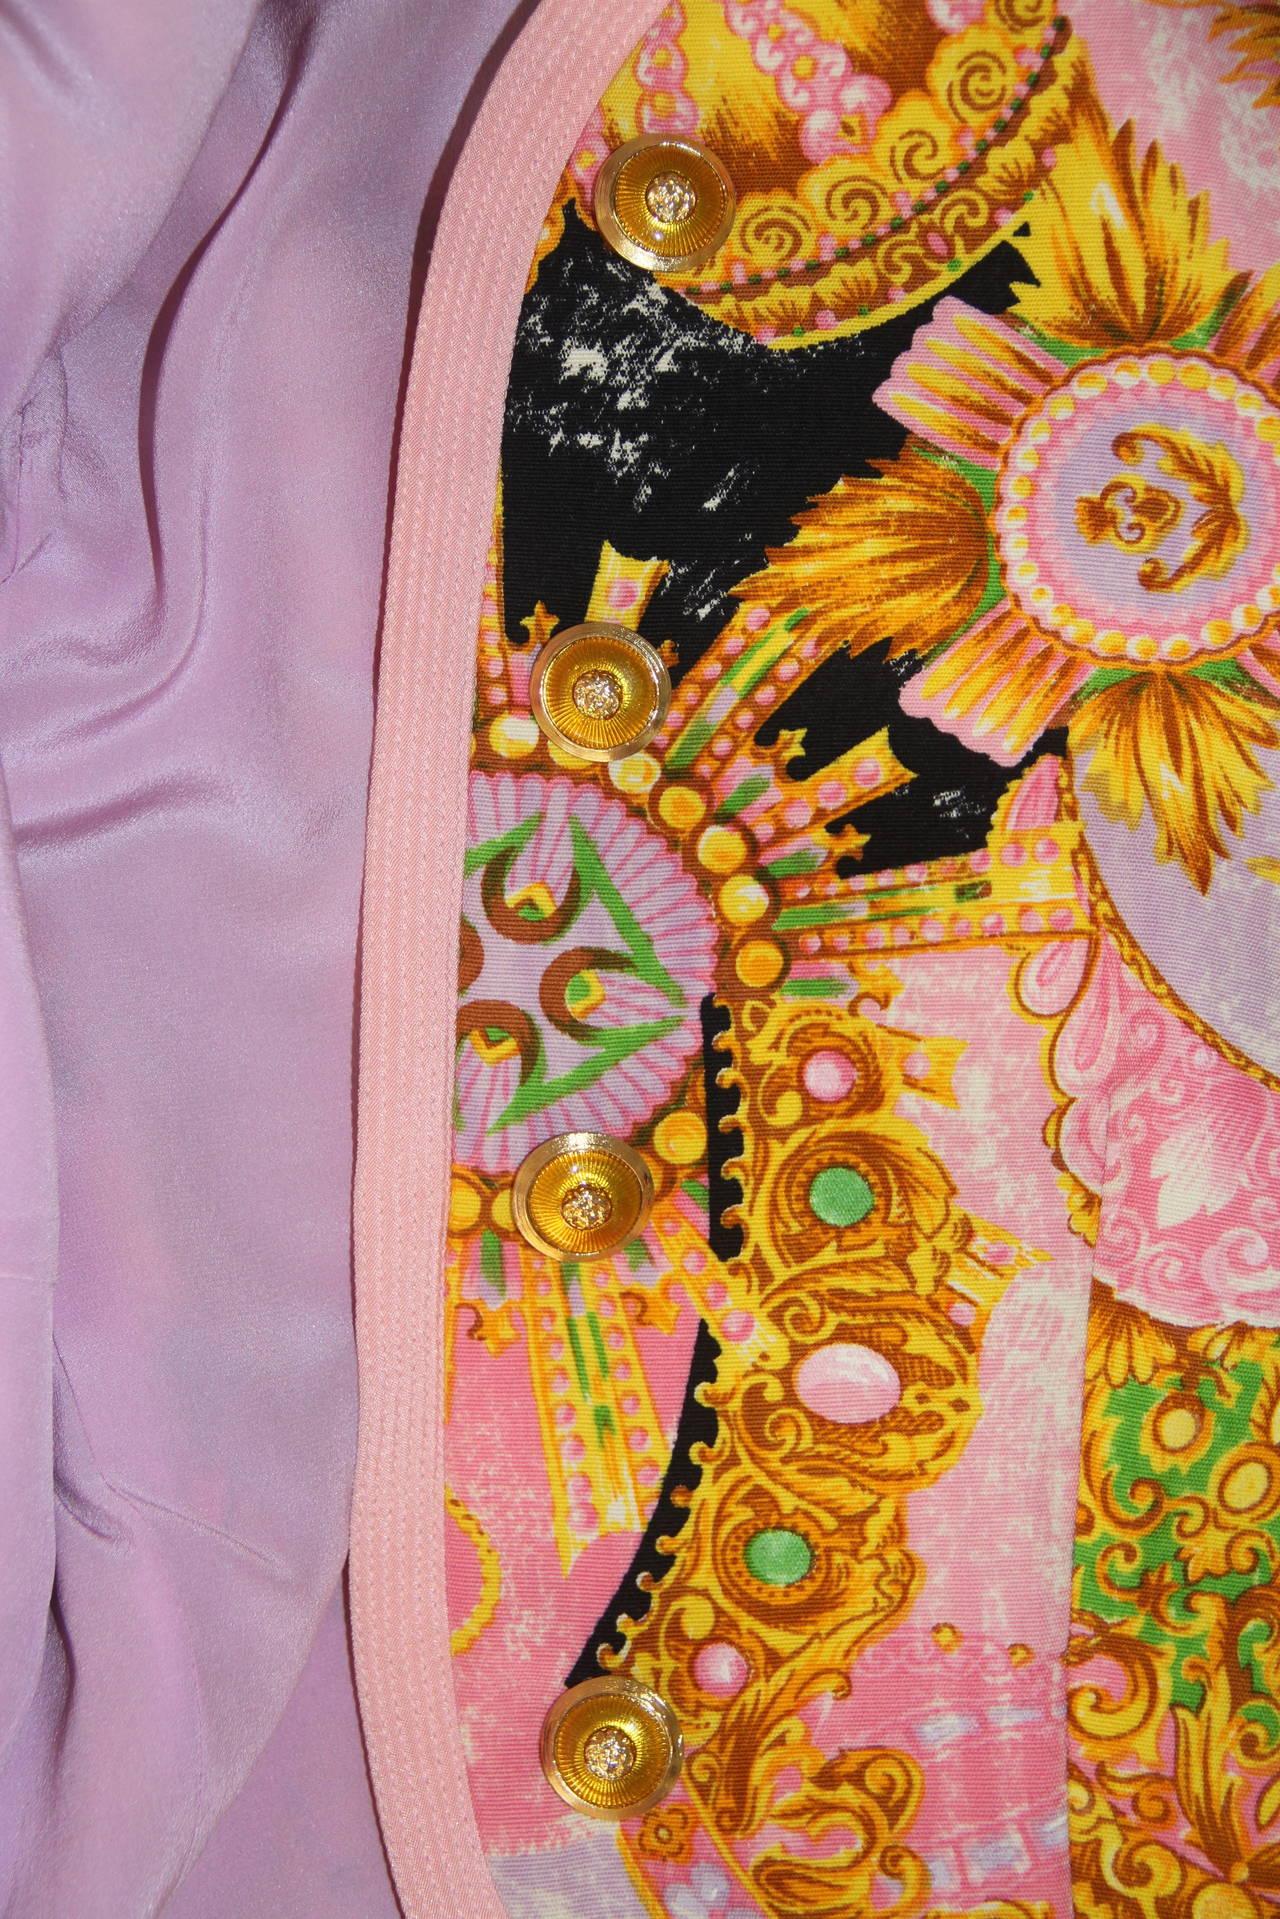 A very rare Atelier Versace suit, featuring a coronet and tiara polychrome print from the Spring 1992 Haute Couture collection, shown at The Ritz in Paris.

The ensemble consists of a short collarless jacket in shades of pink, mauve, green, gold